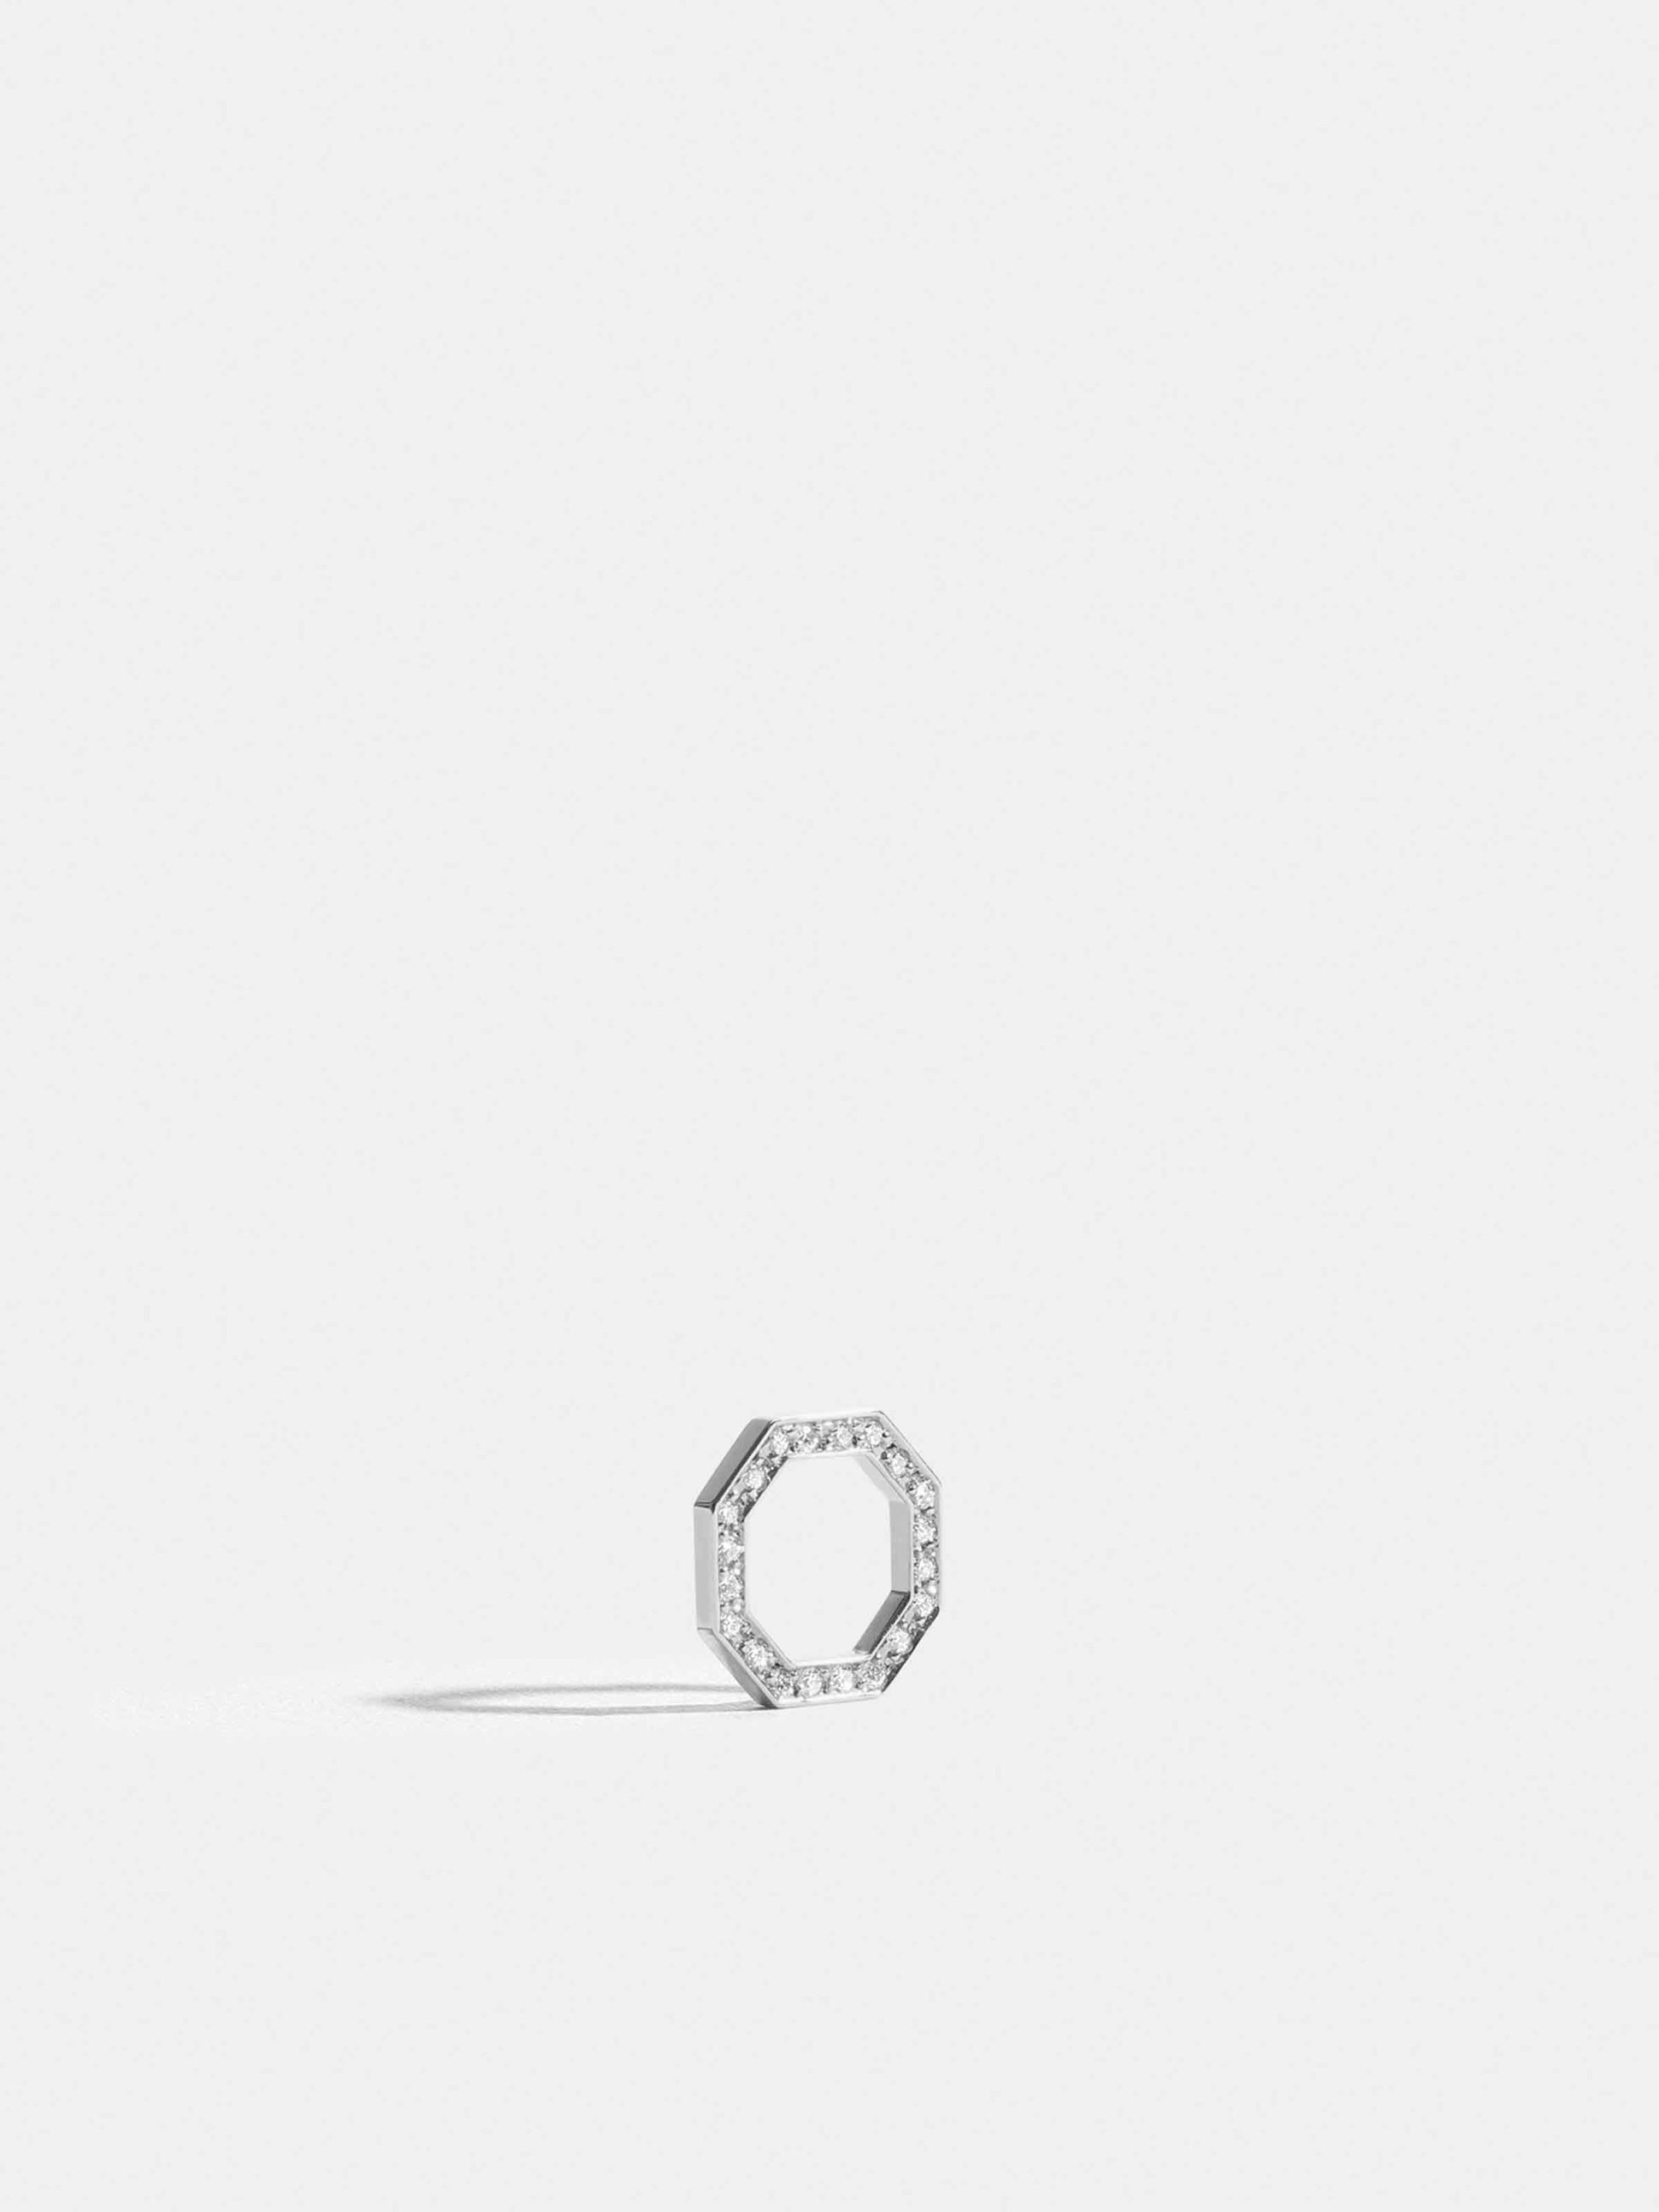 Octogone motif in 18k Fairmined ethical white gold, paved with lab-grown diamonds, on a black cord.